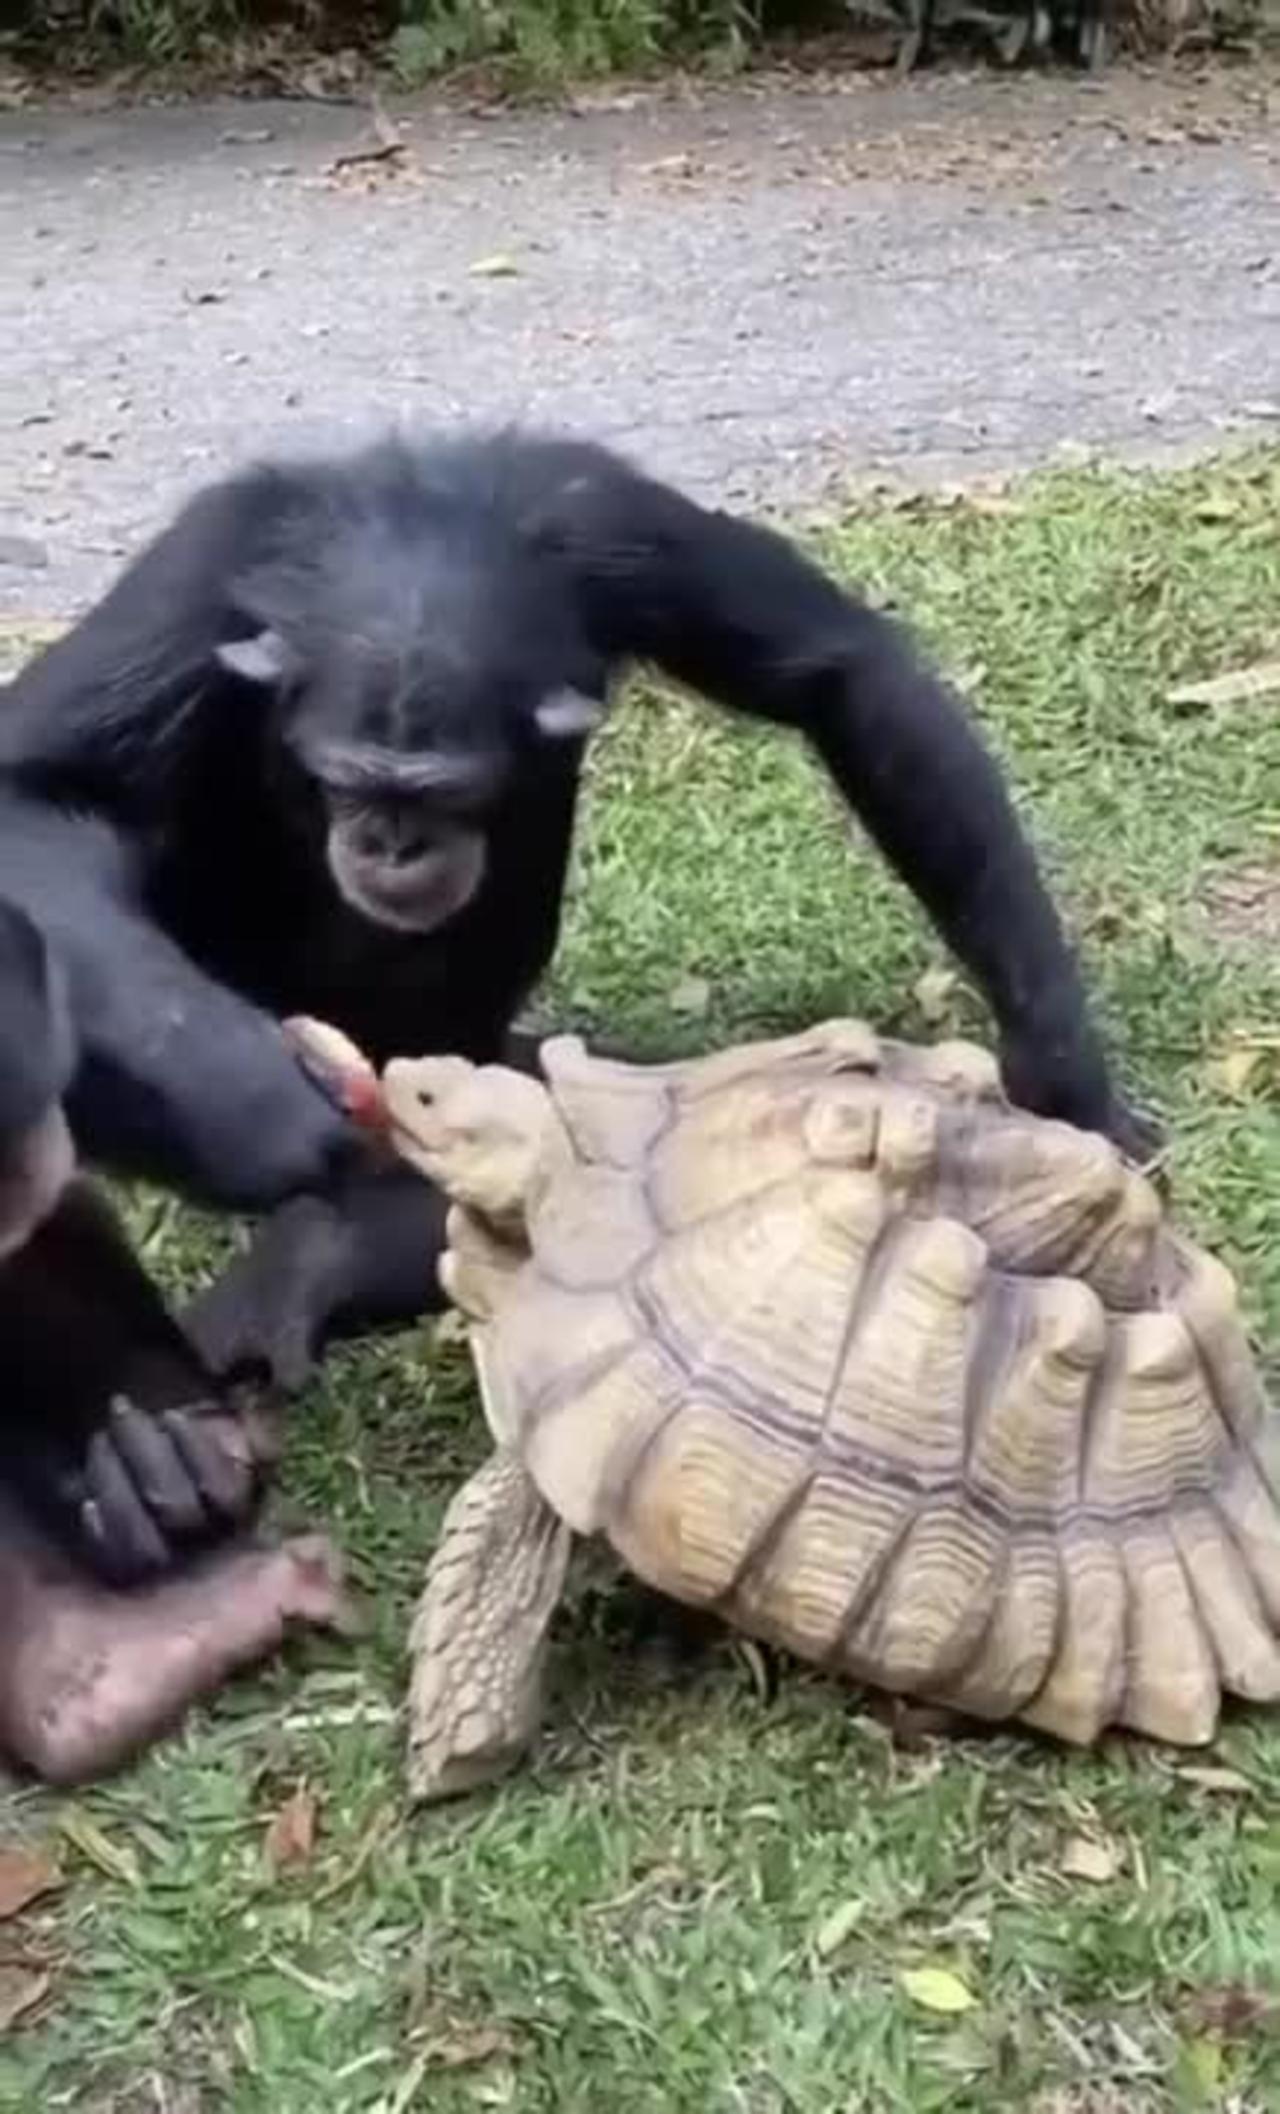 The monkey eats an apple and feeds it to a hungry big turtle.